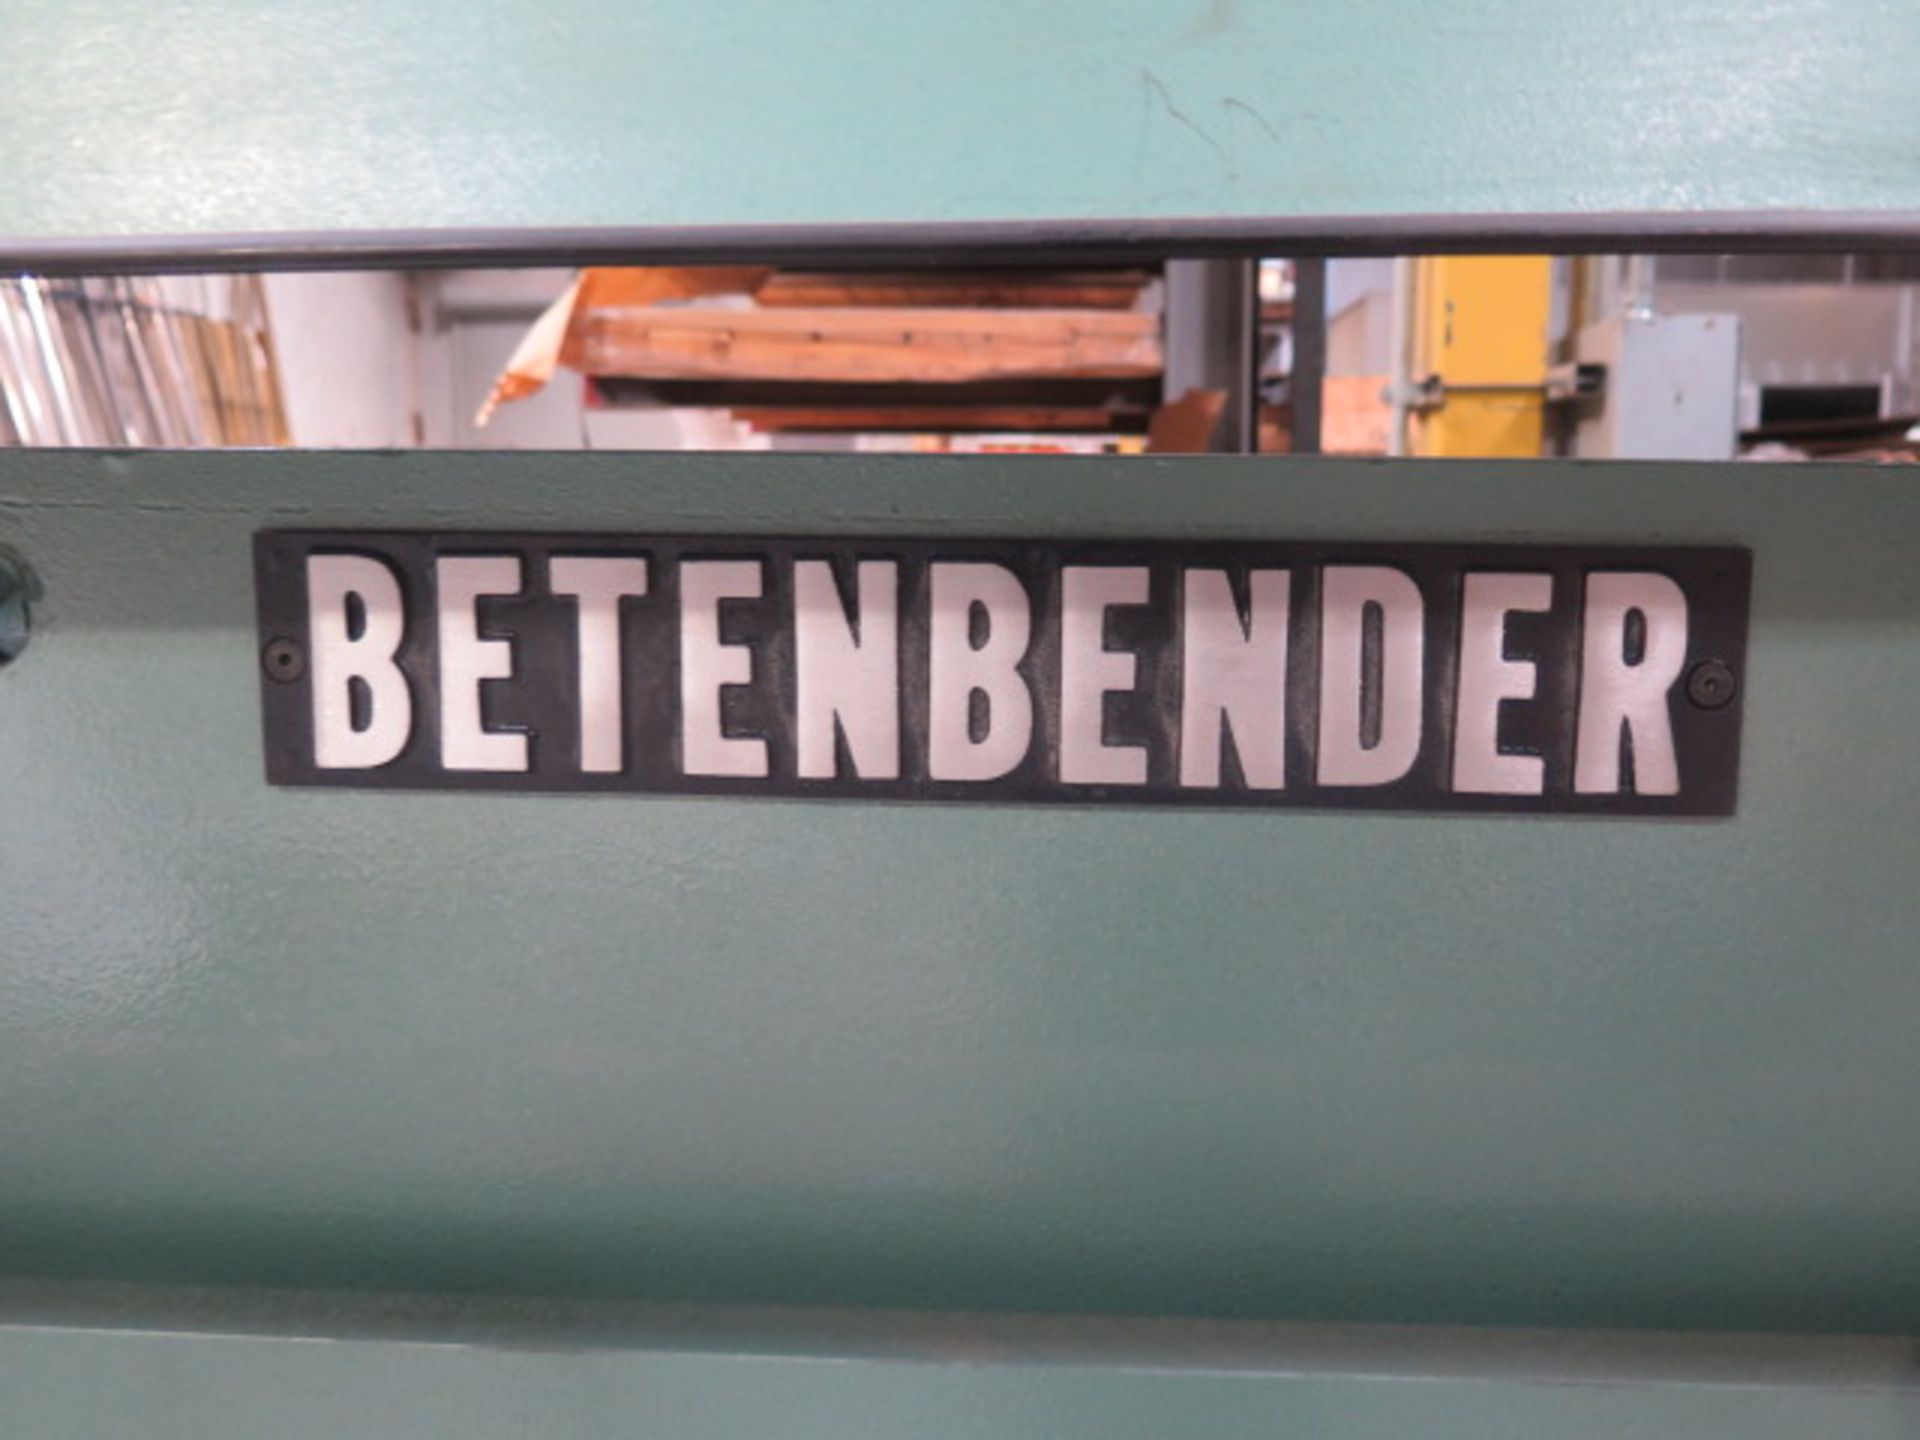 Betenbender mdl. 12-1/4 12’ X .25'' Power Shear s/n 262919 w/ PLC Controls, 53” Squaring, SOLD AS IS - Image 11 of 13